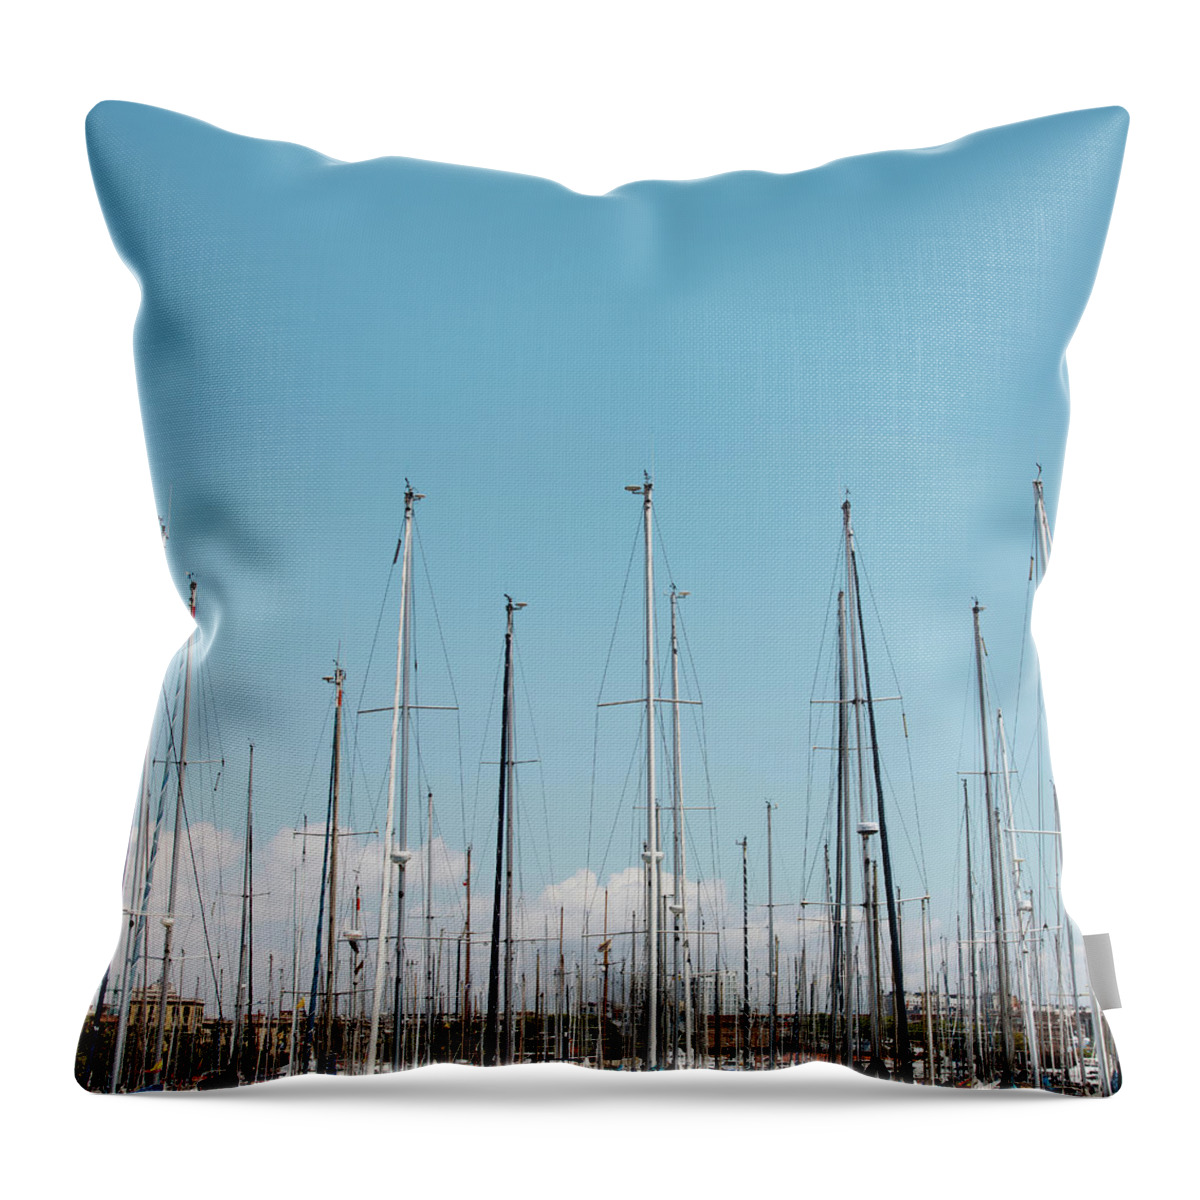 Sailboat Throw Pillow featuring the photograph Mastils by Roc Canals Photography